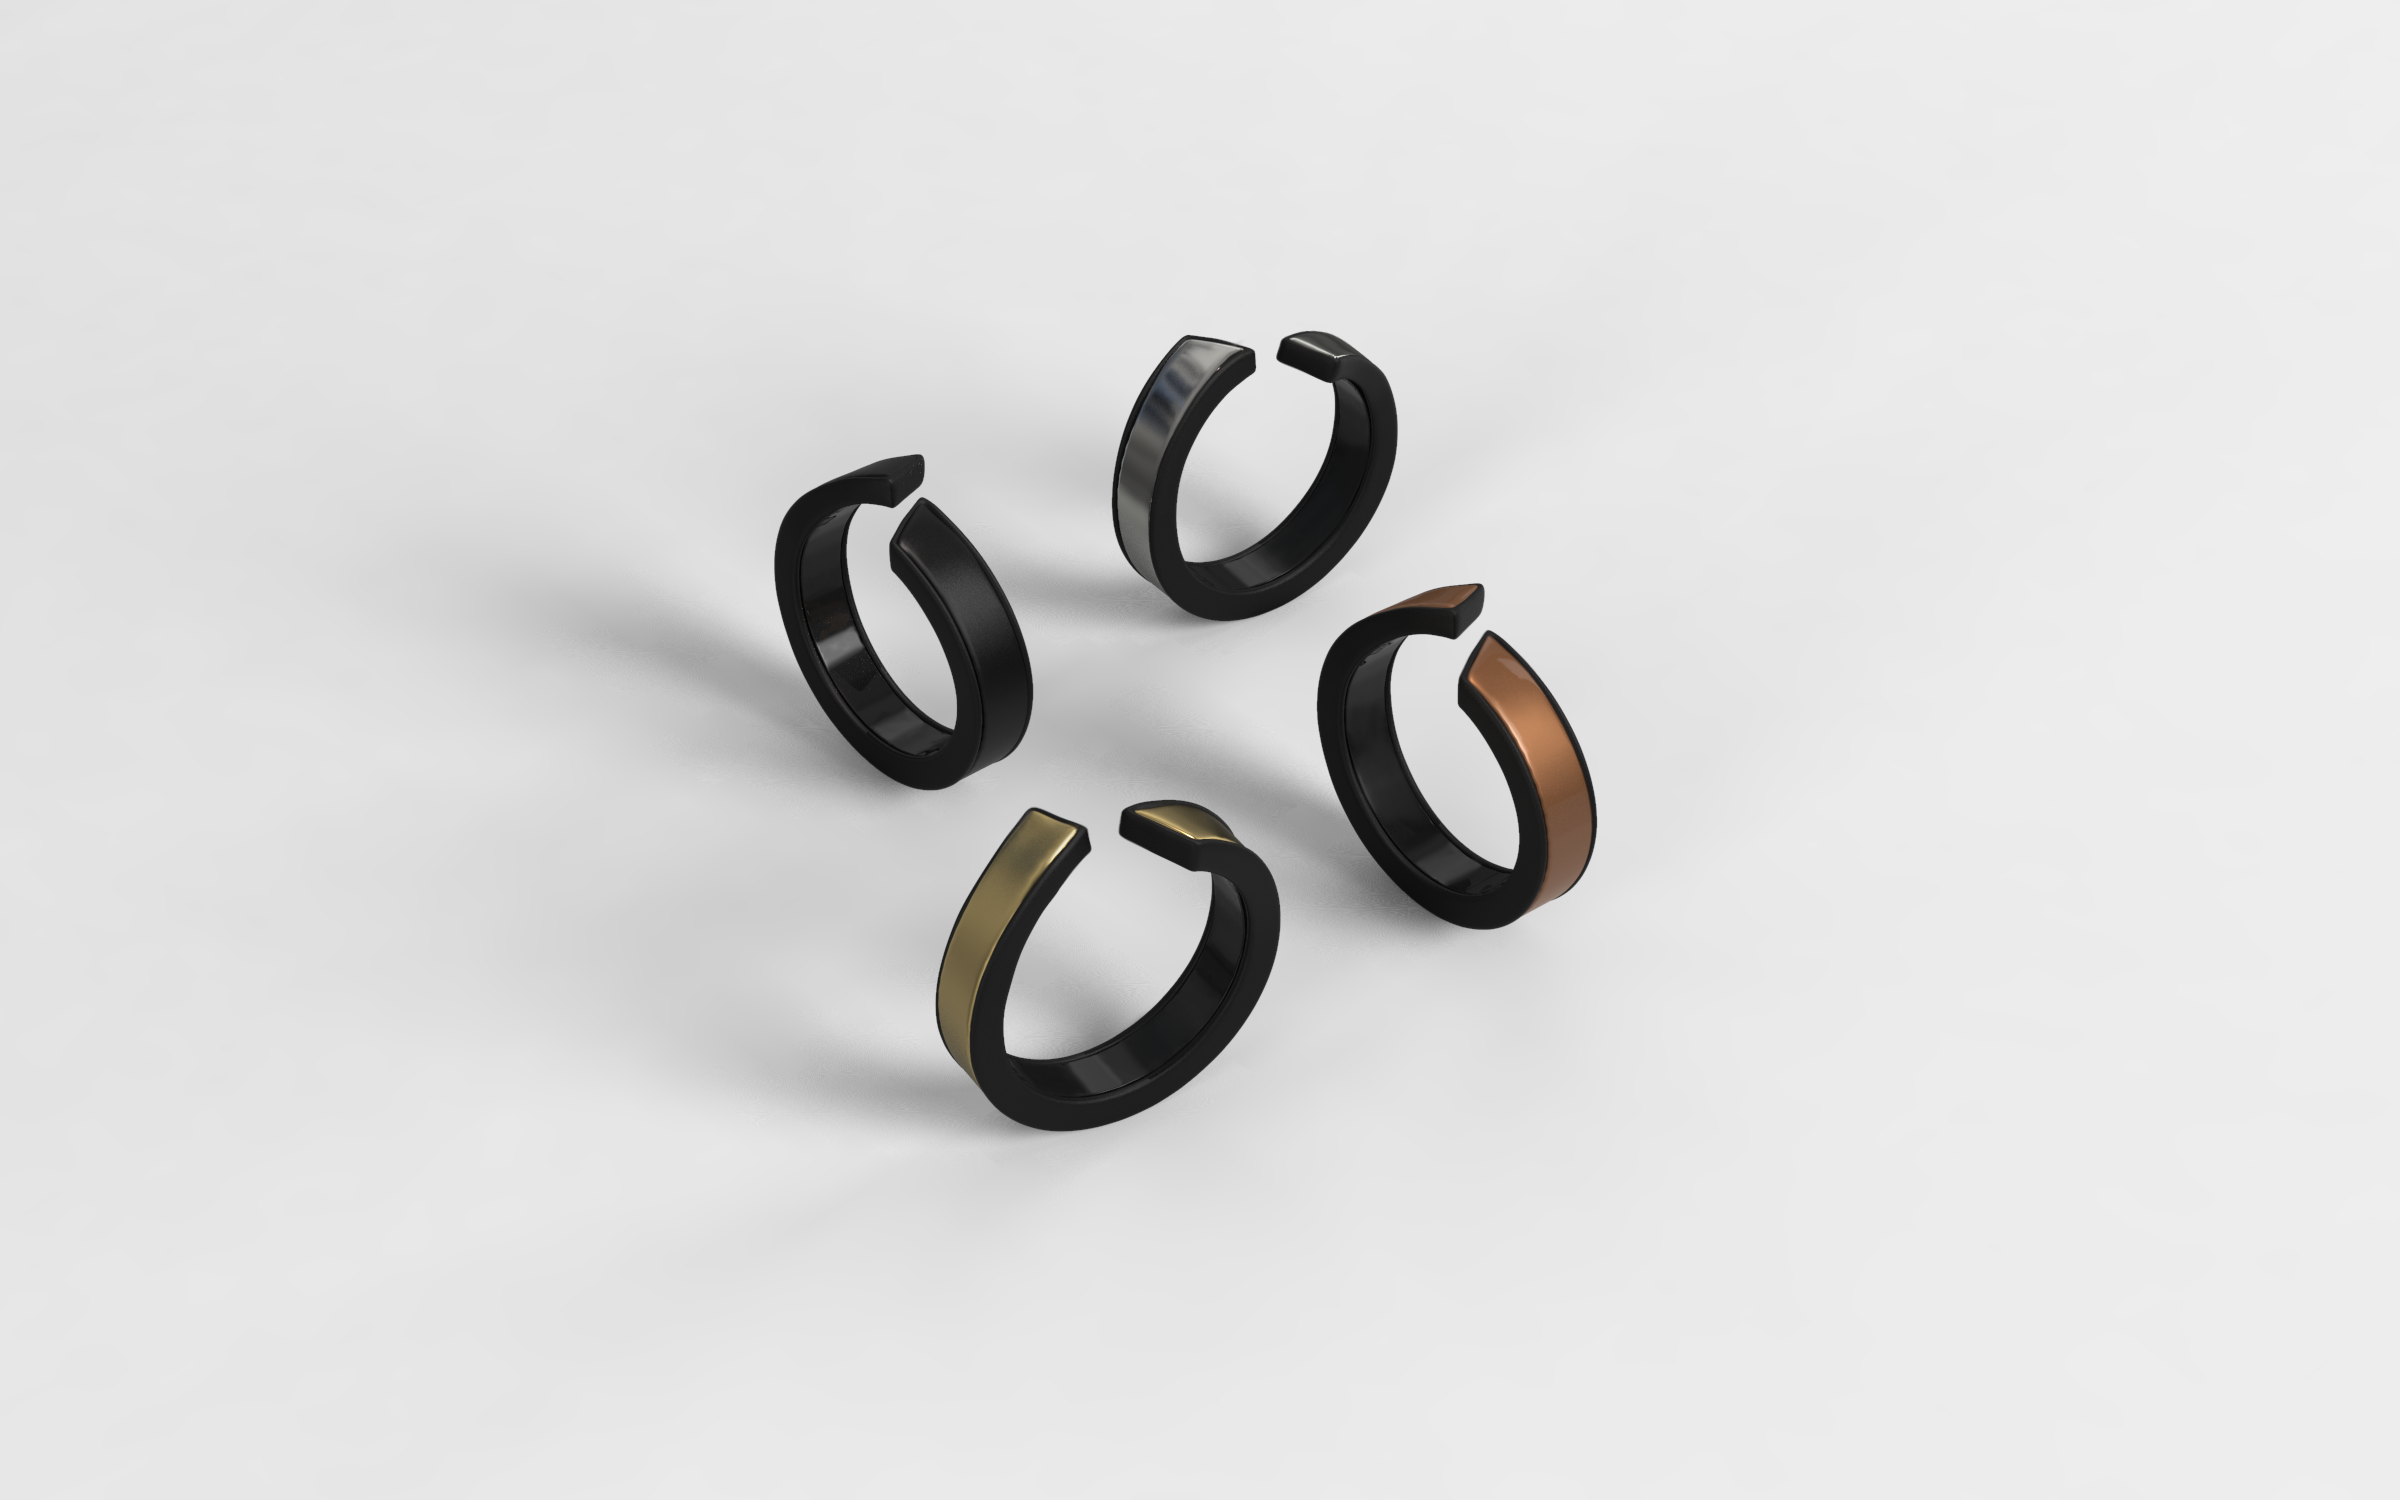 Renders of four Movano Rings